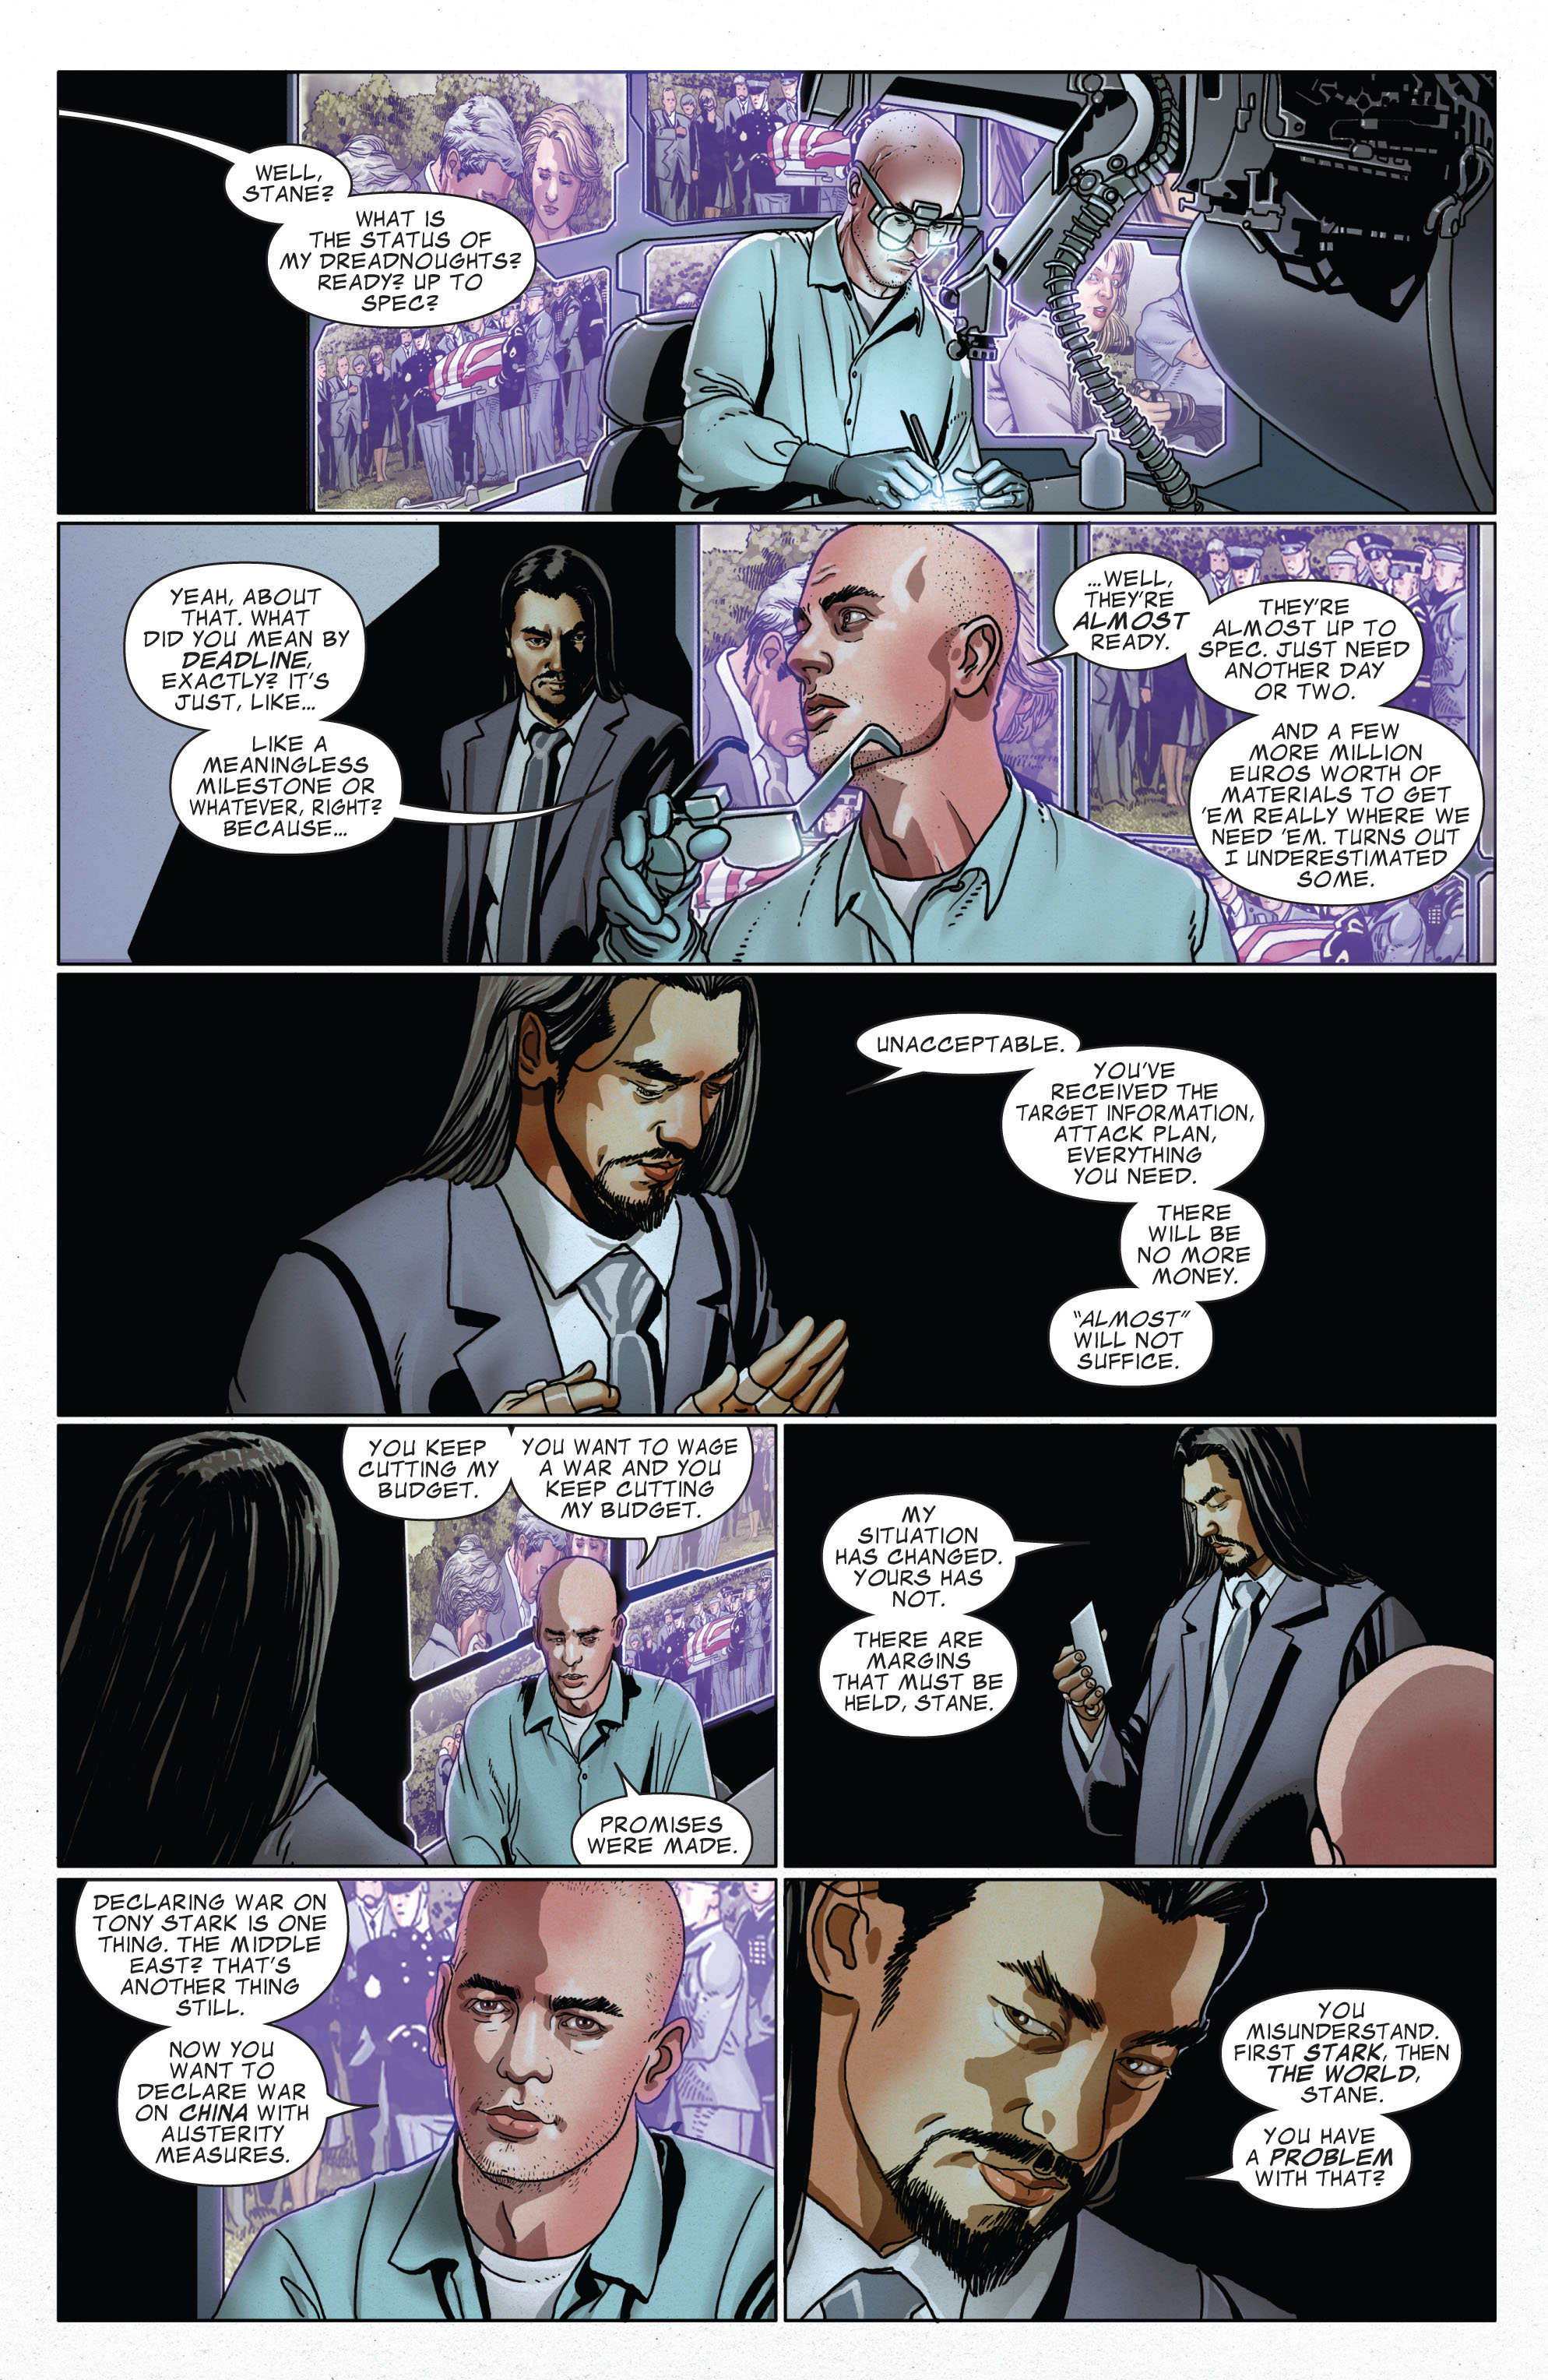 Invincible Iron Man (2008) 512 Page 9